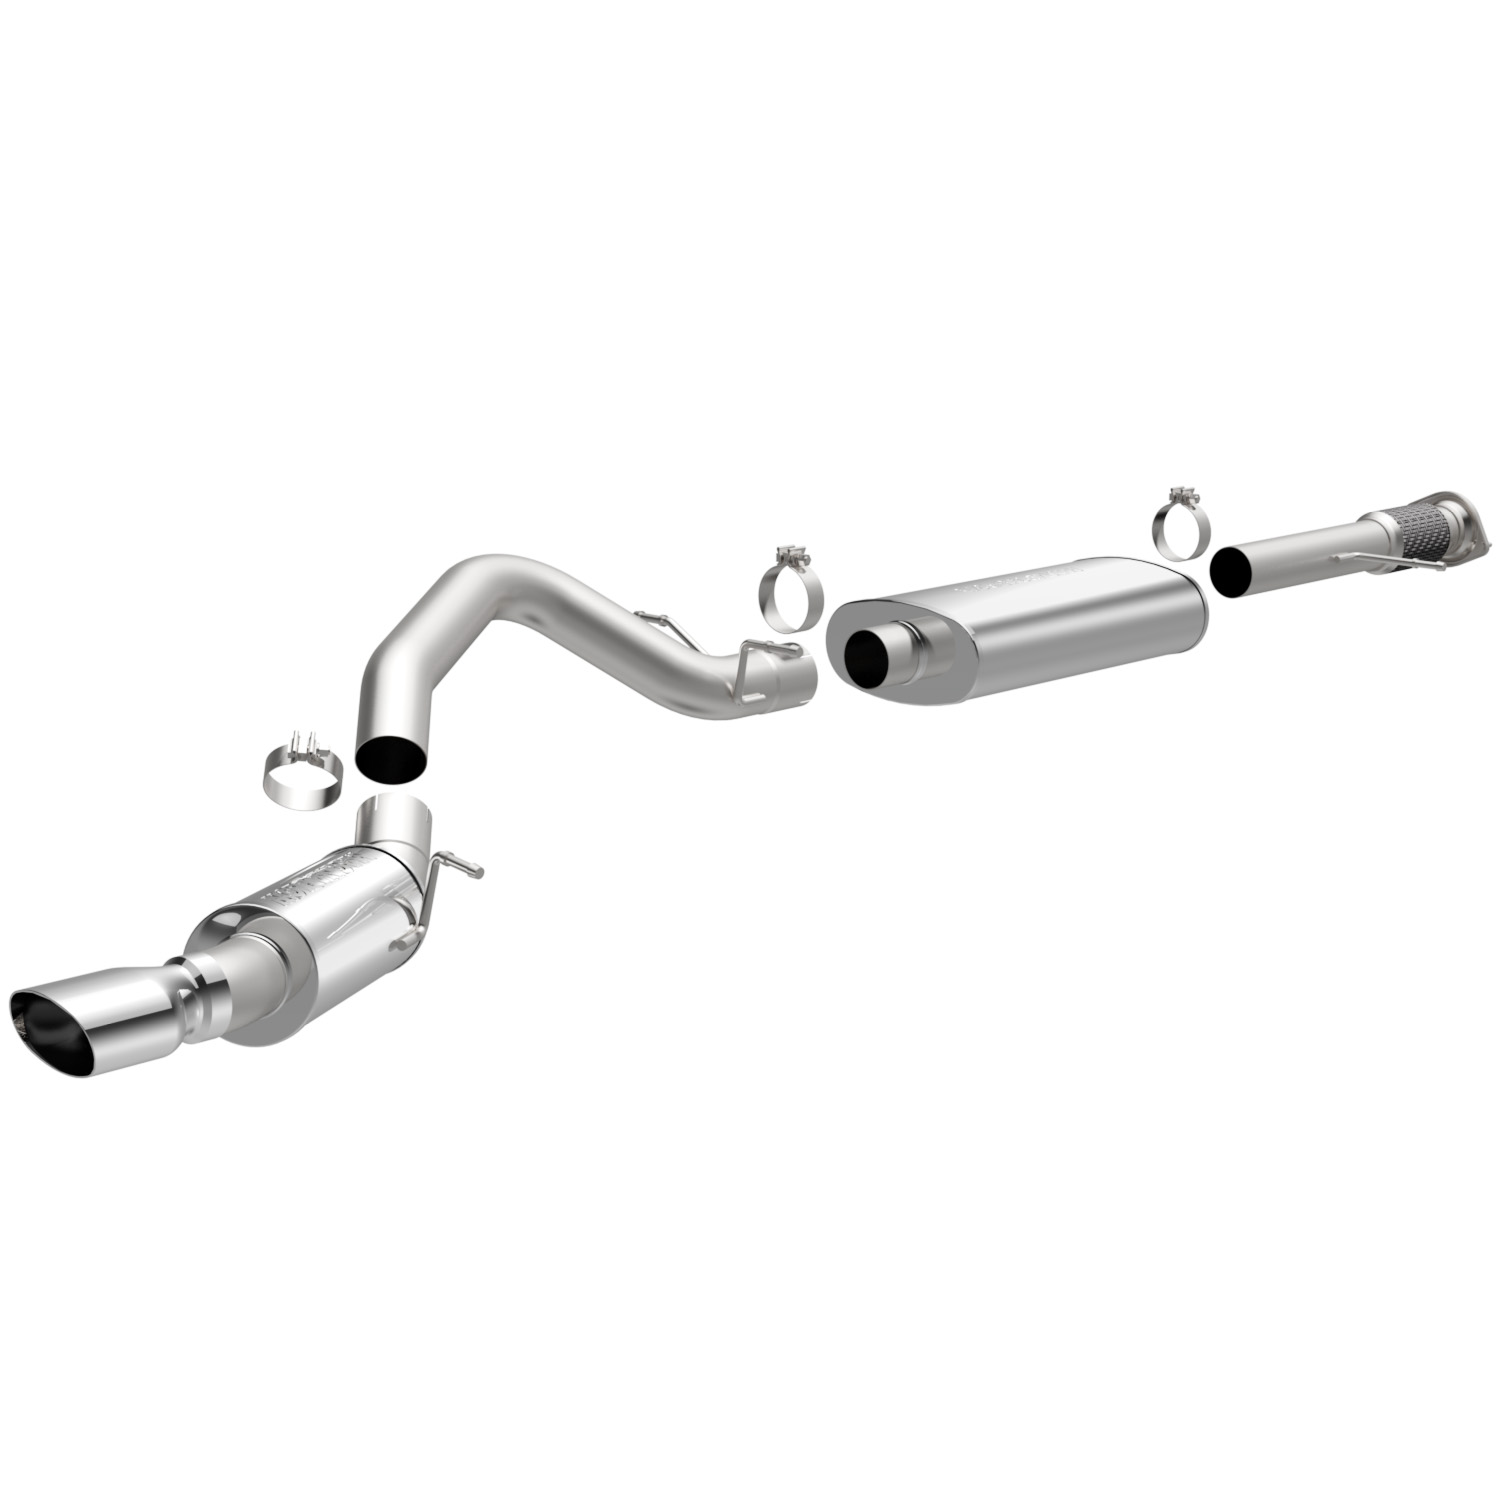 MF Series Cat-Back Exhaust System 2009-2010 Cadillac Escalade 6.2L (Excludes Hybrid)